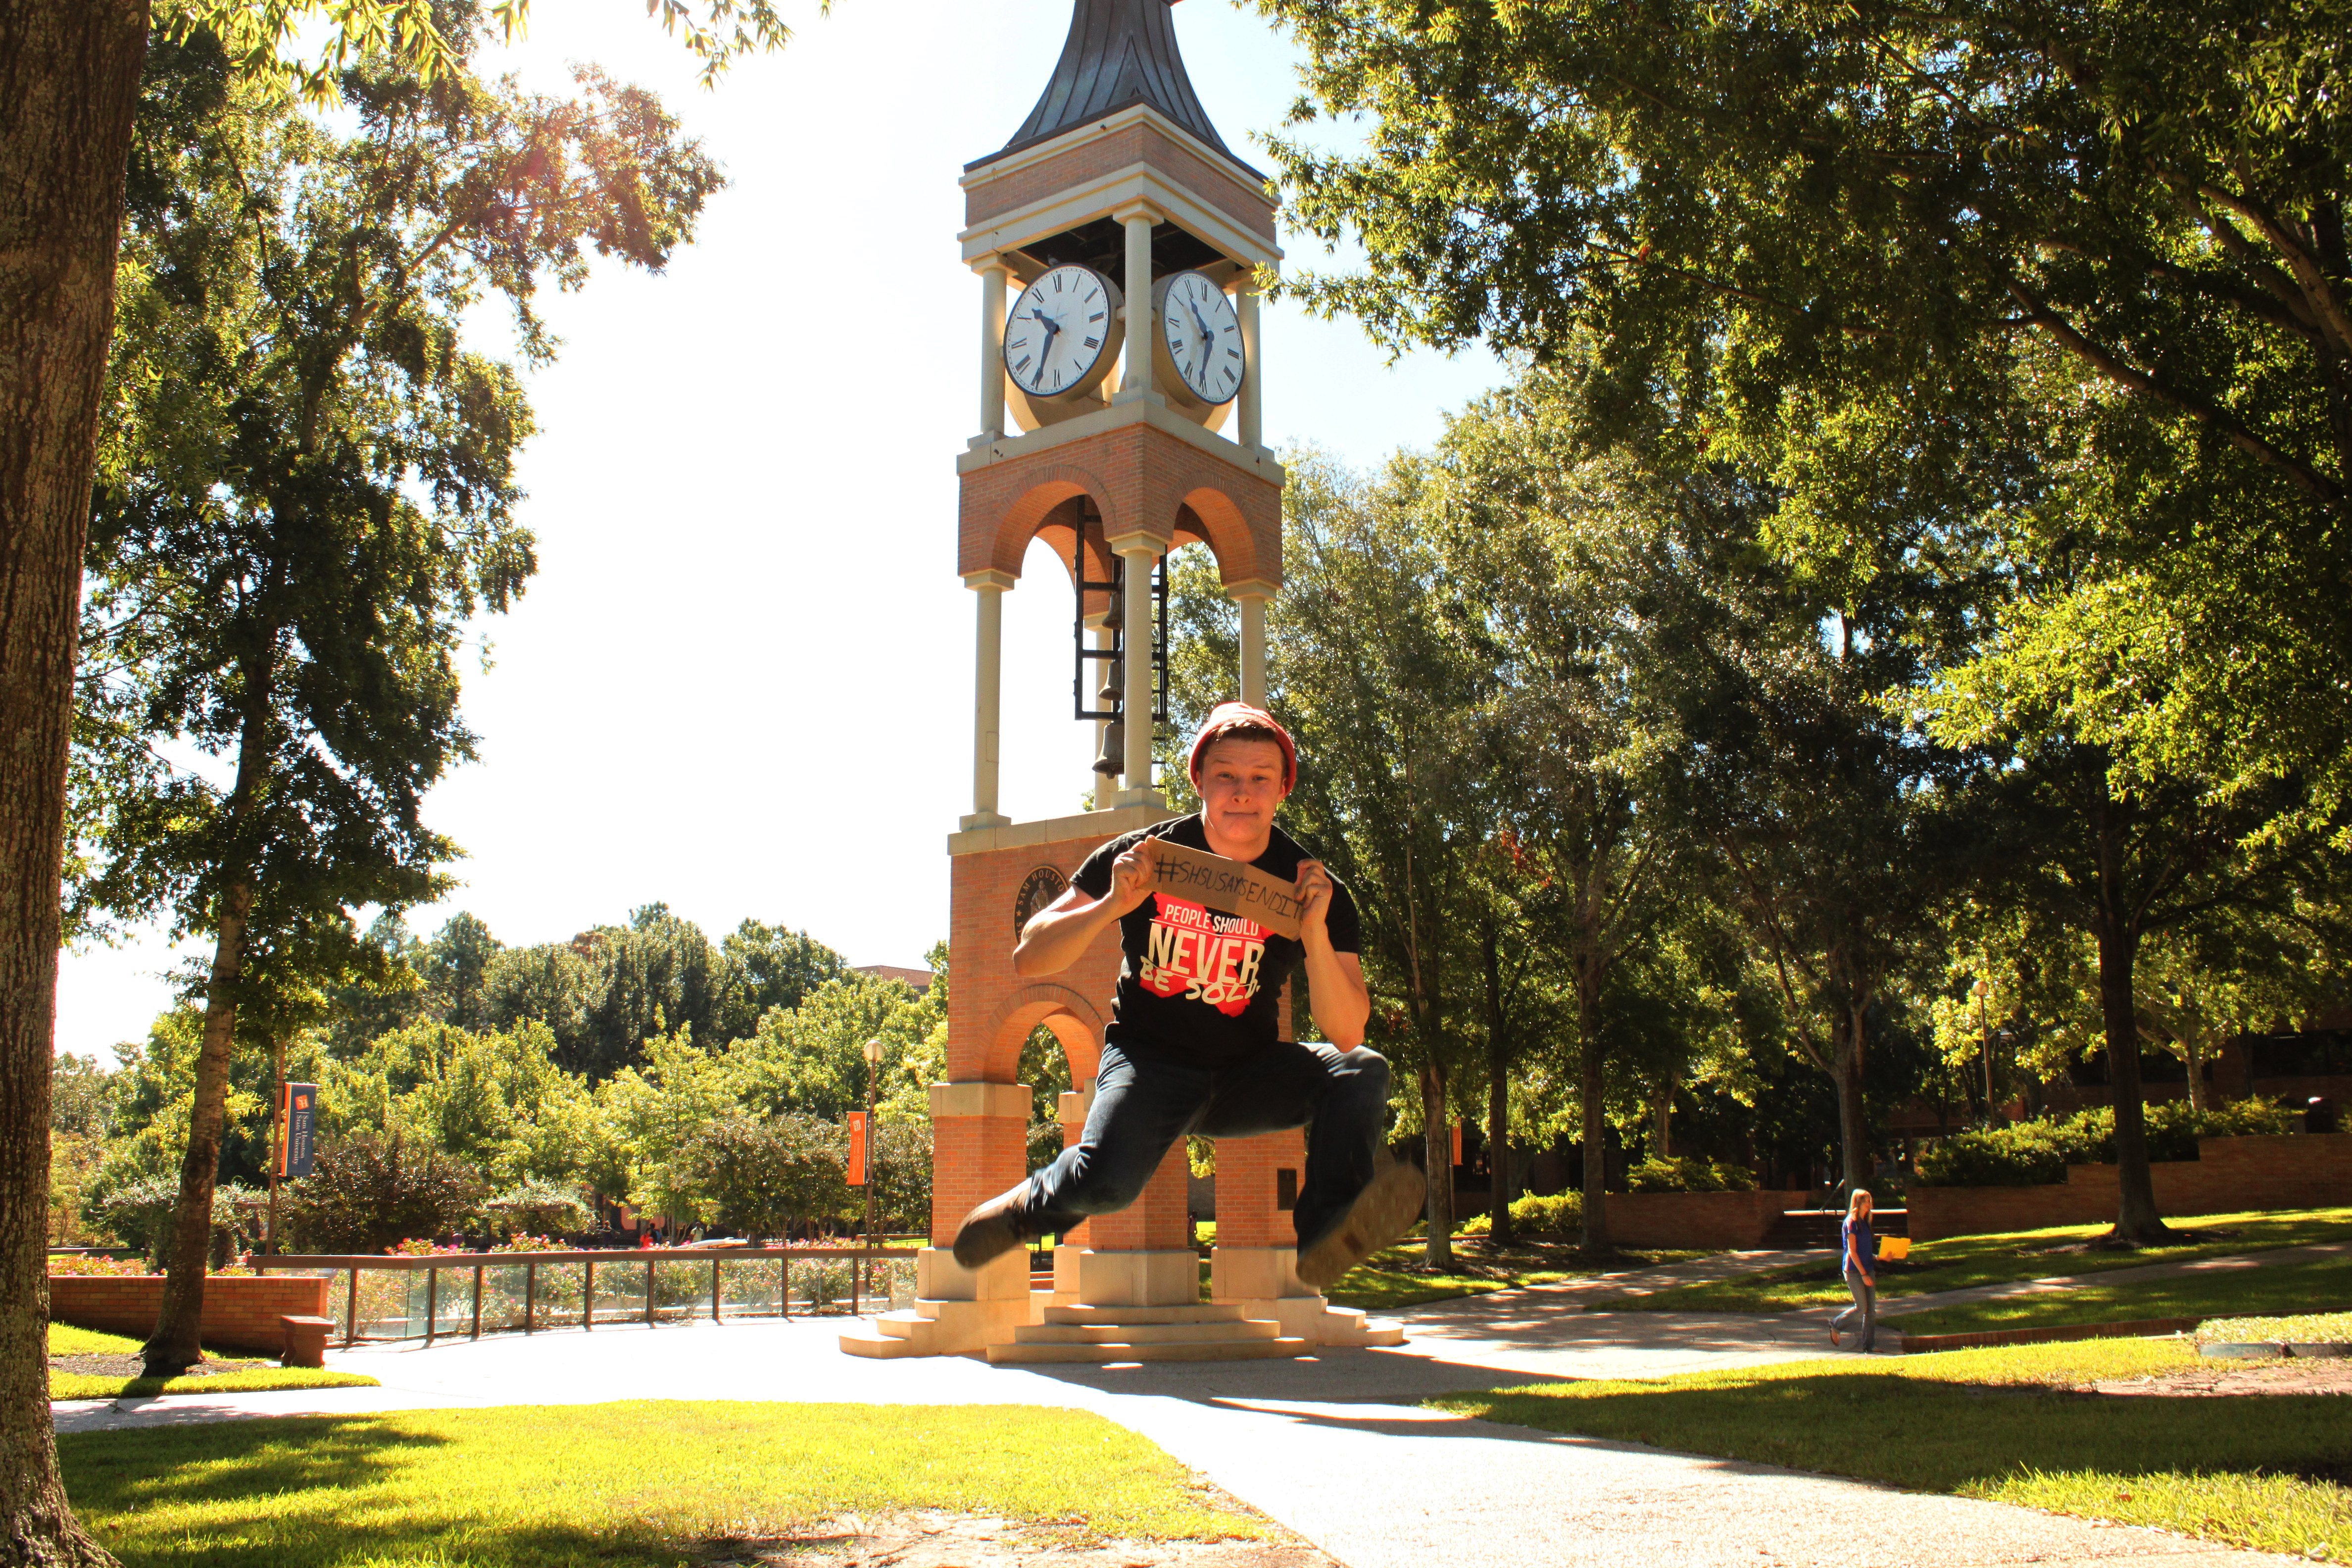 Lex in front of the clock tower on campus